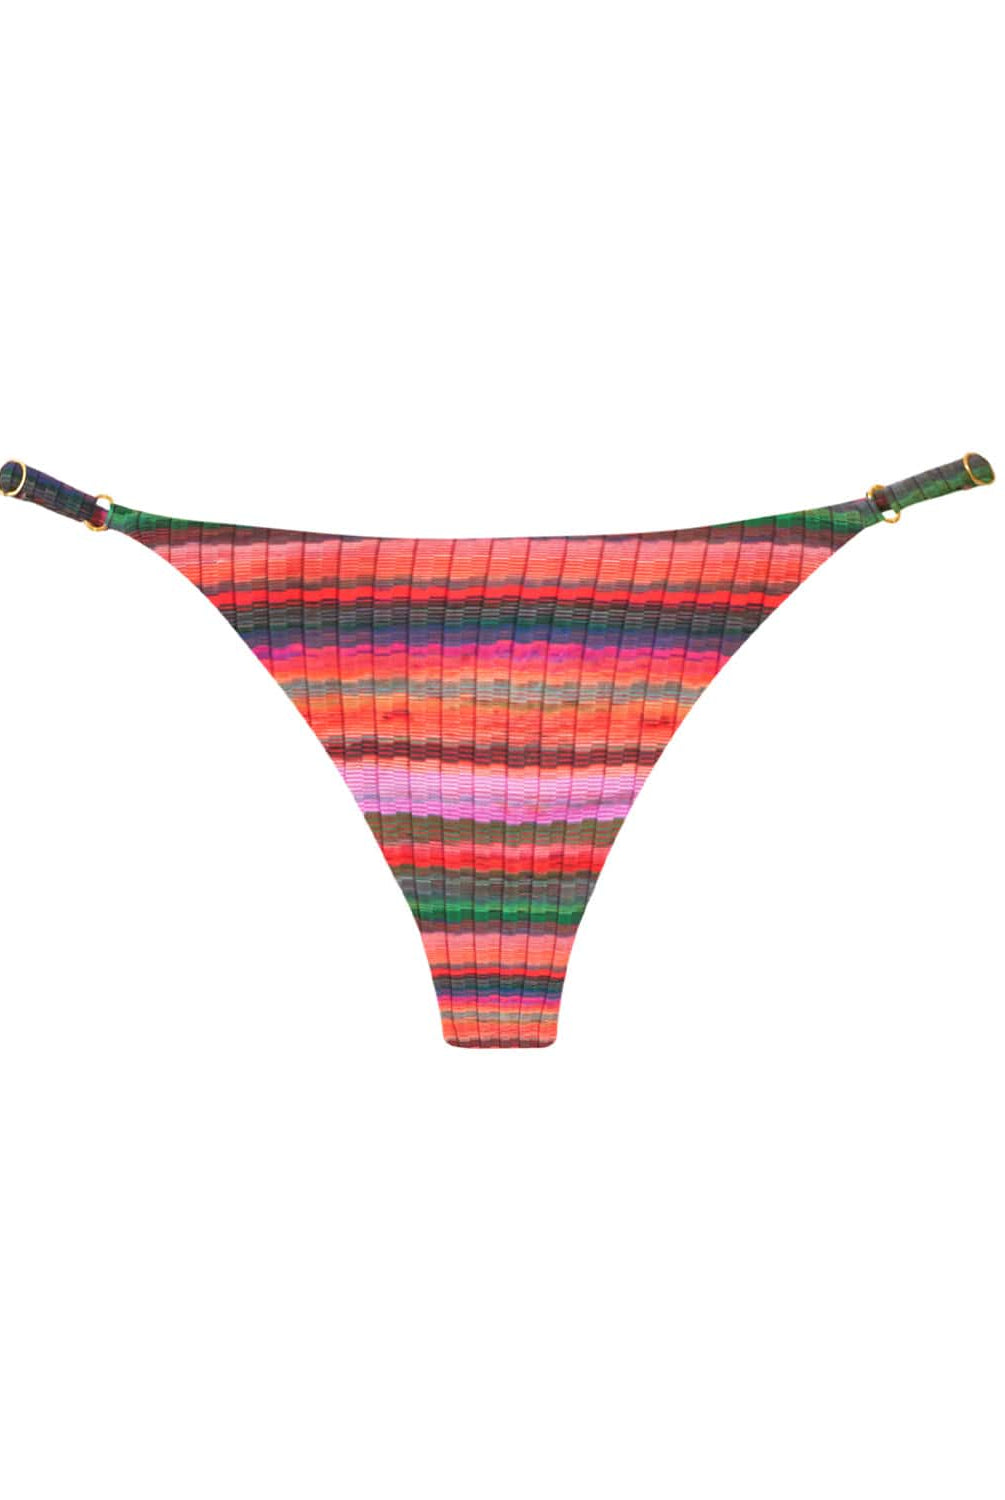 A multi-colored stripe print adjustable bikini bottom with gold details. Featured against a white wall background.